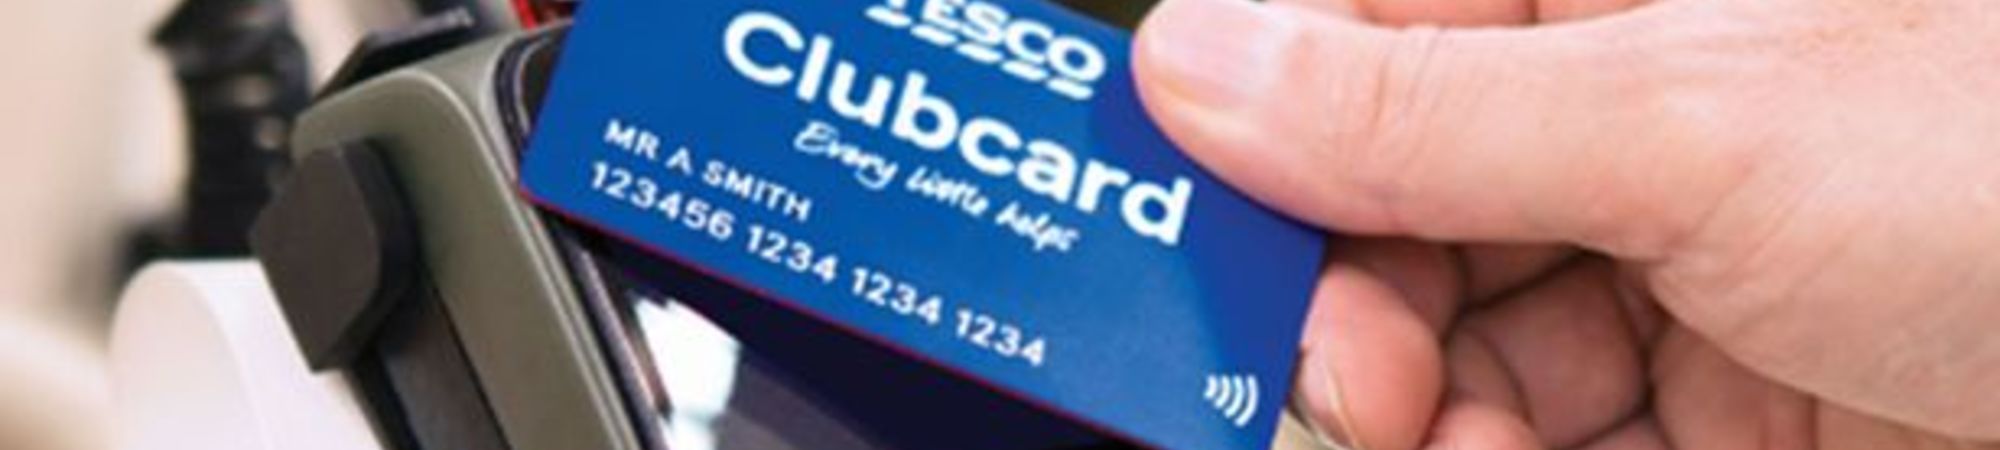 Tesco introduces new contactless loyalty cards